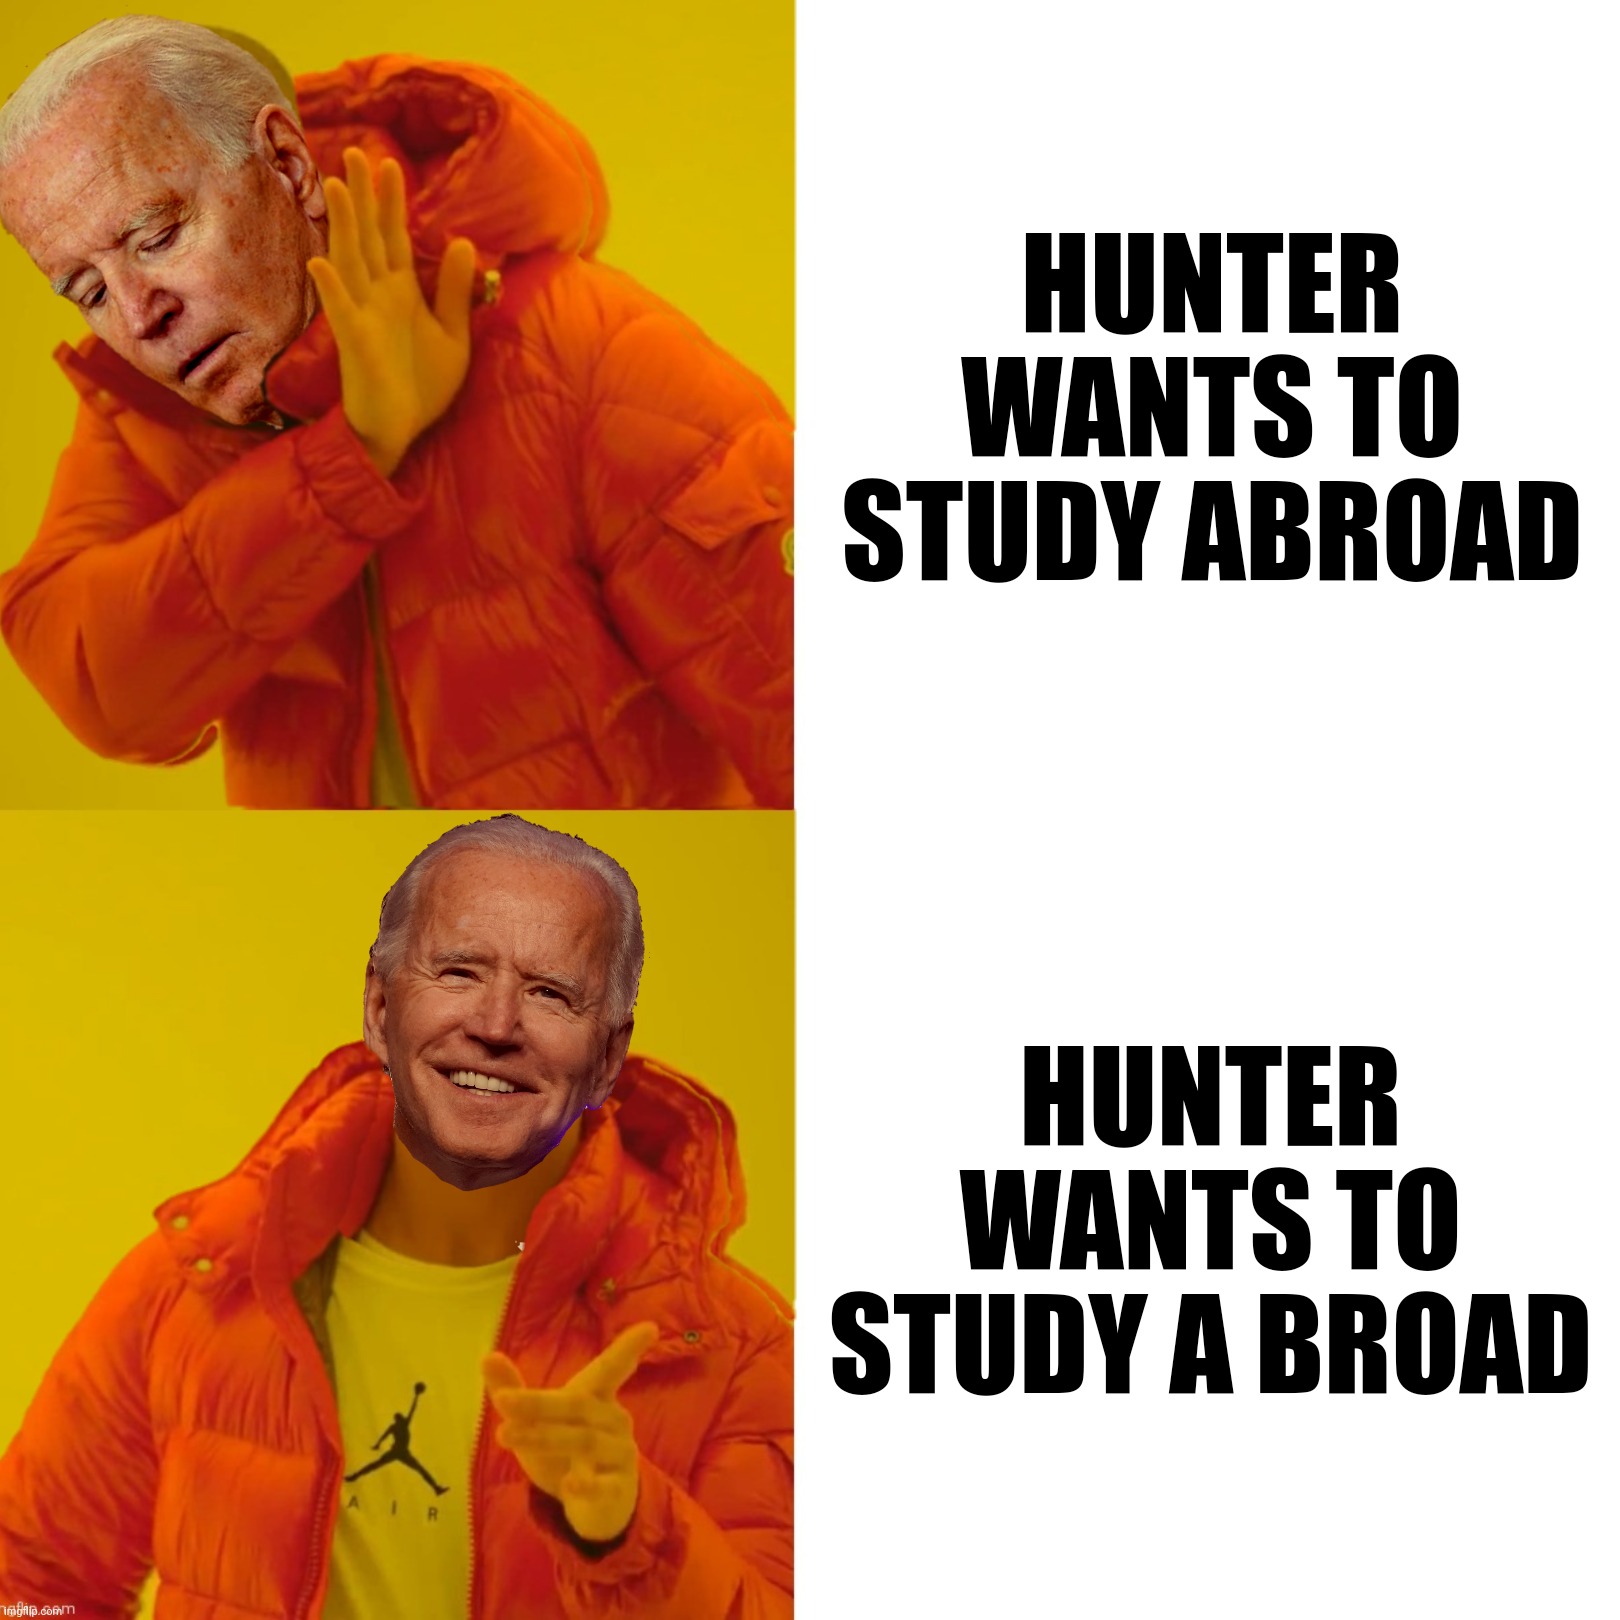 HUNTER WANTS TO STUDY ABROAD HUNTER WANTS TO STUDY A BROAD | made w/ Imgflip meme maker